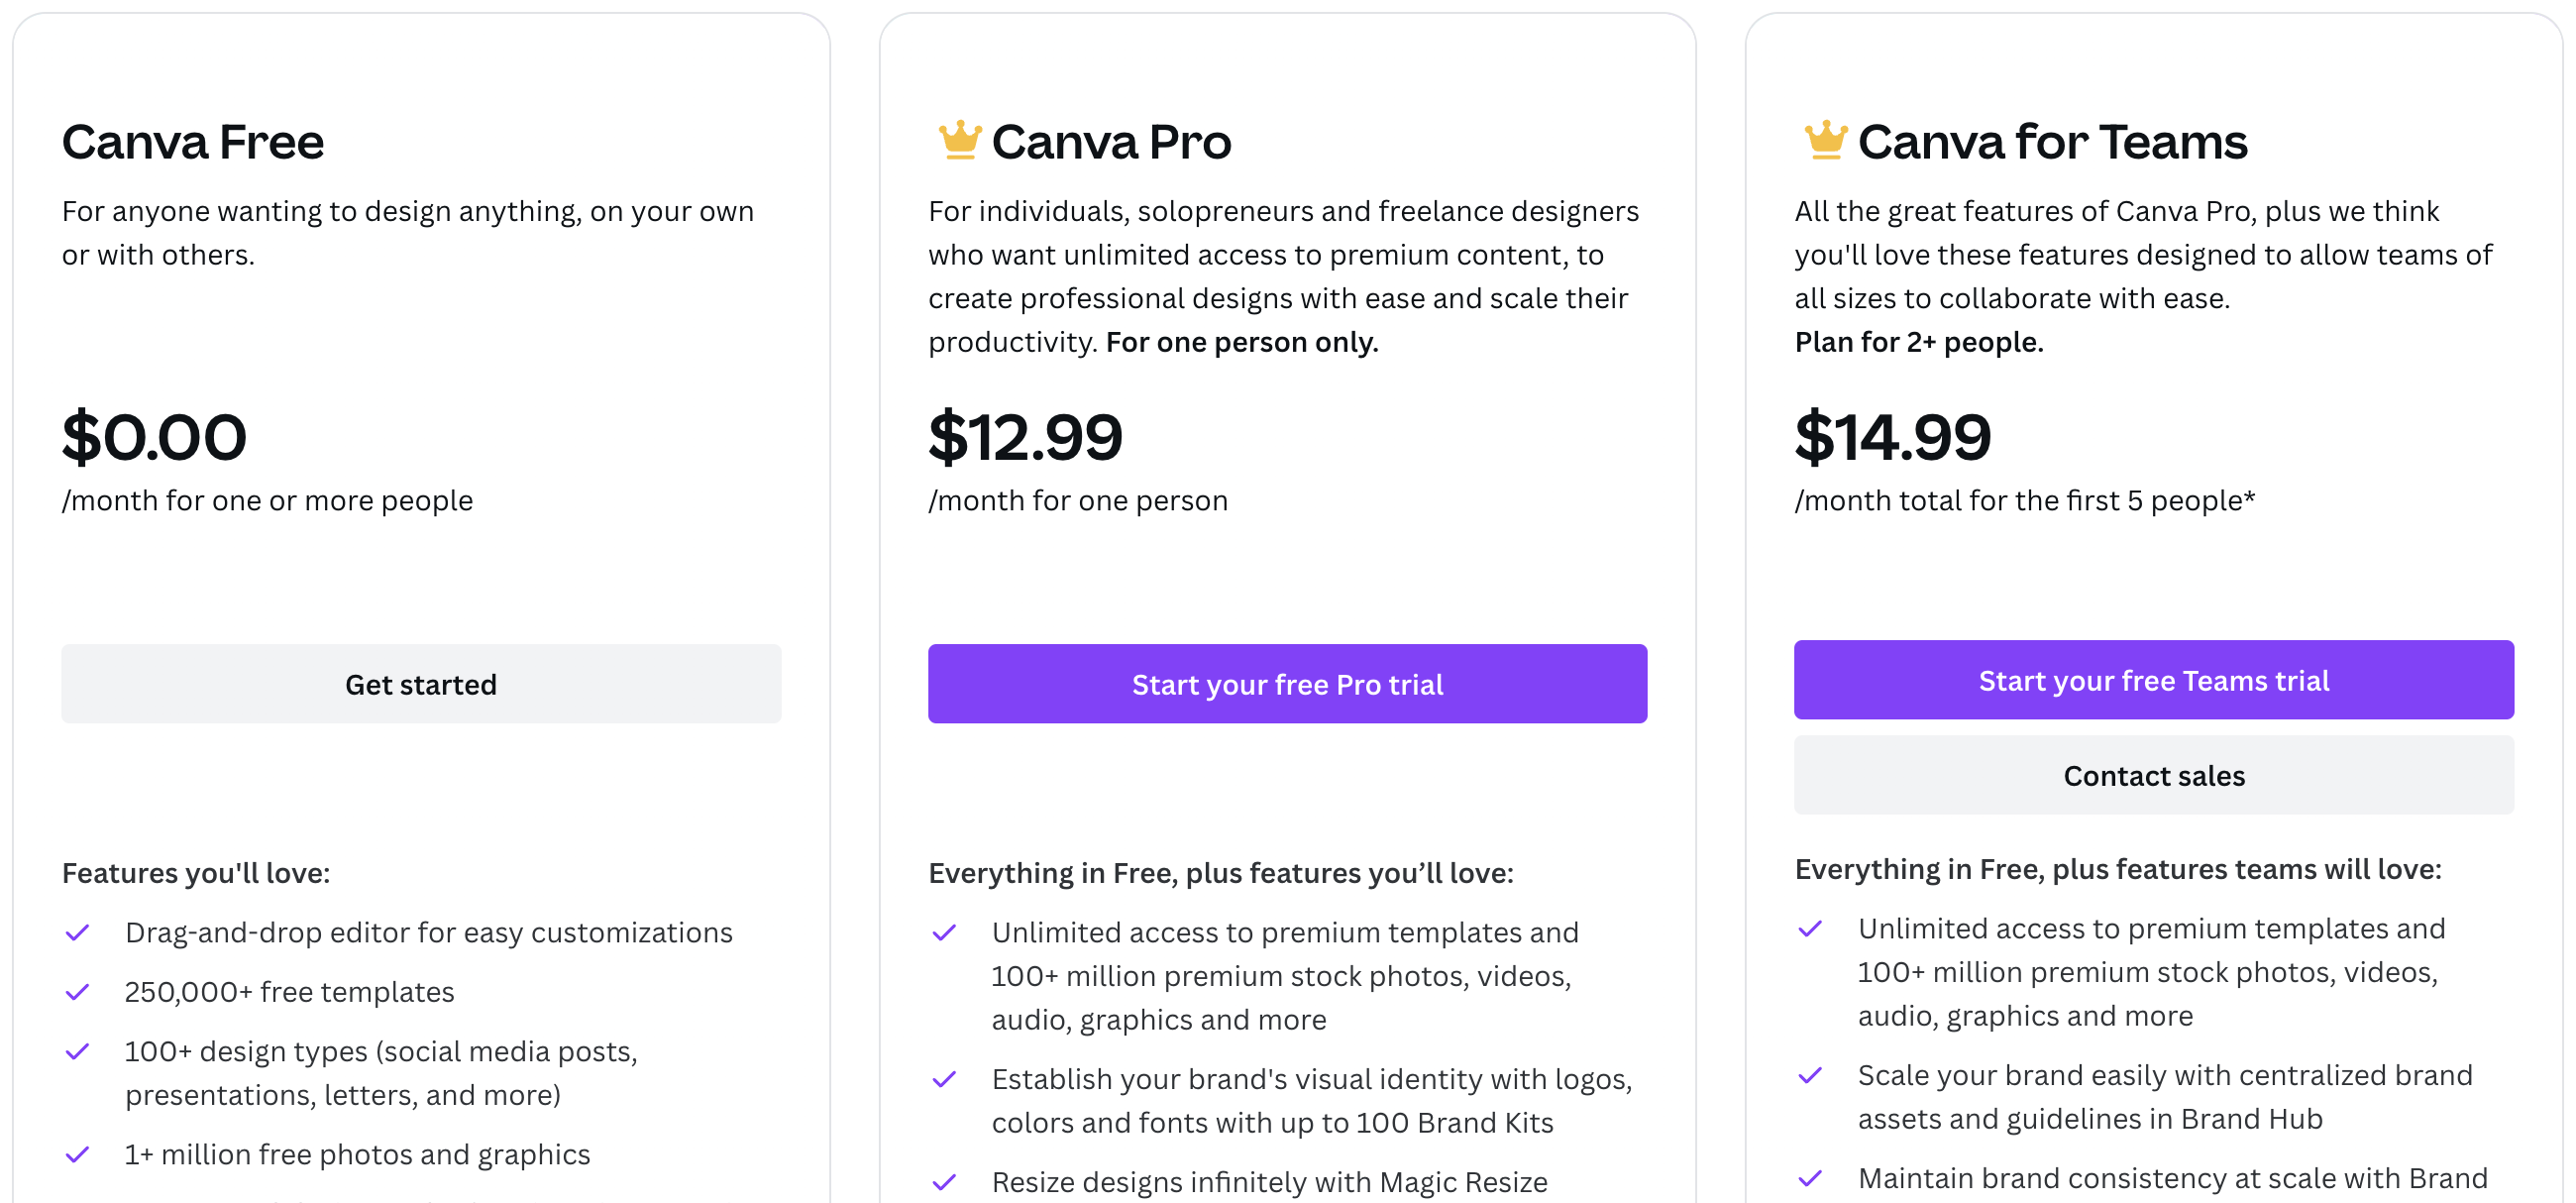 Source: https://www.canva.com/pricing/